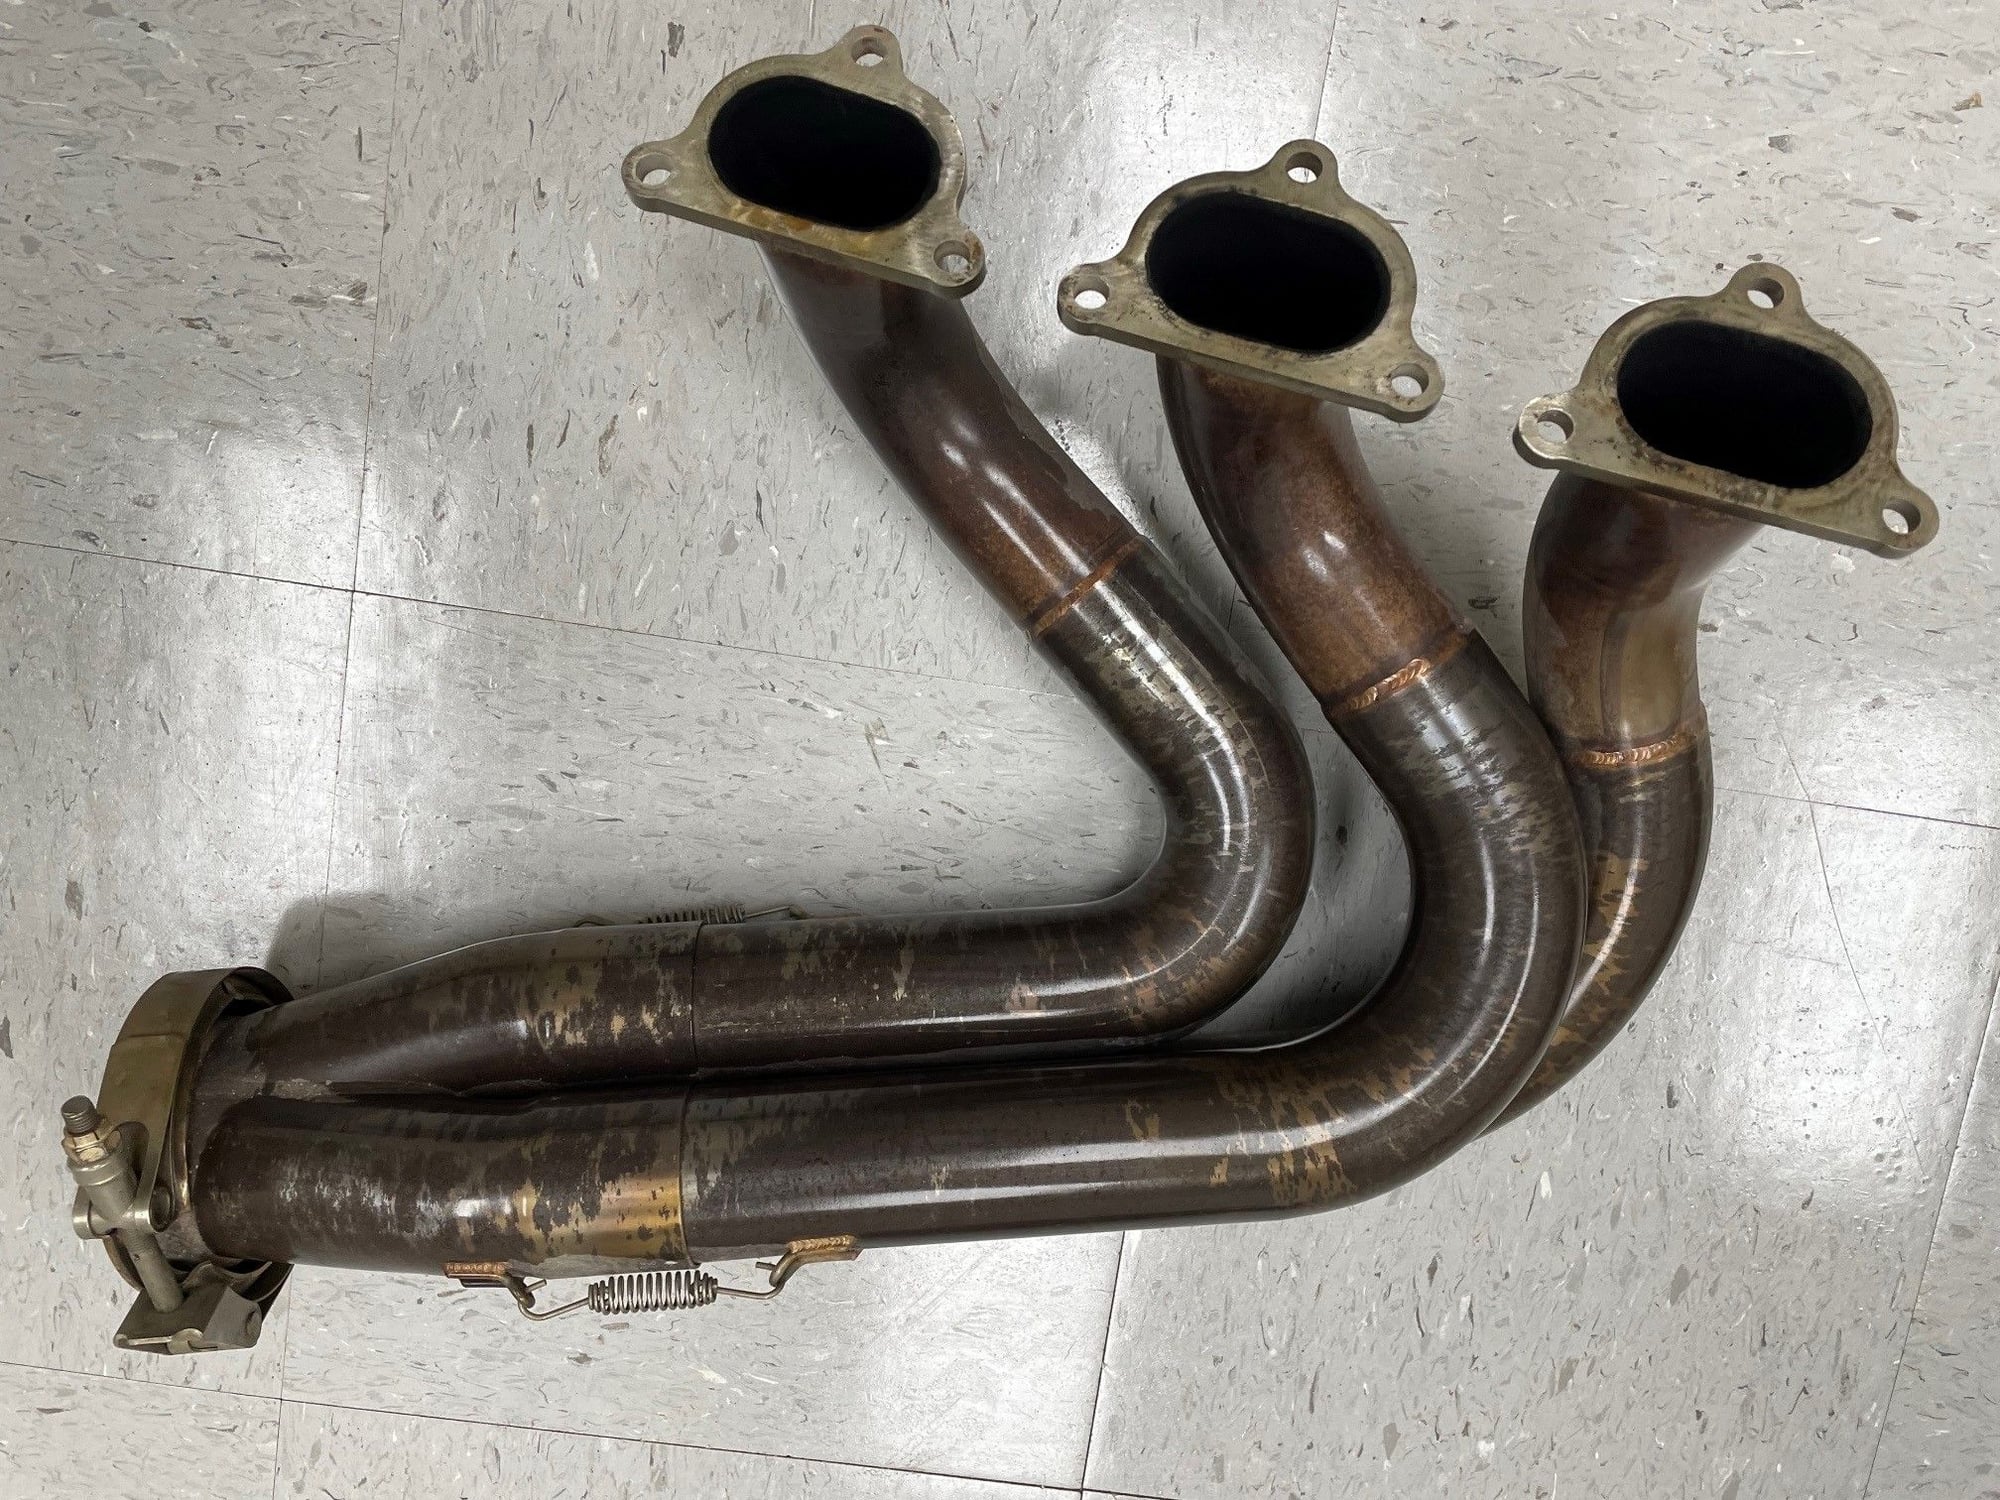 Engine - Exhaust - DUNDON Motorsports RACE HEADER / MUFFLER Power Package for 991.1 GT3 - Used - 2015 to 2017 Porsche GT3 - Louisville, KY 40299, United States